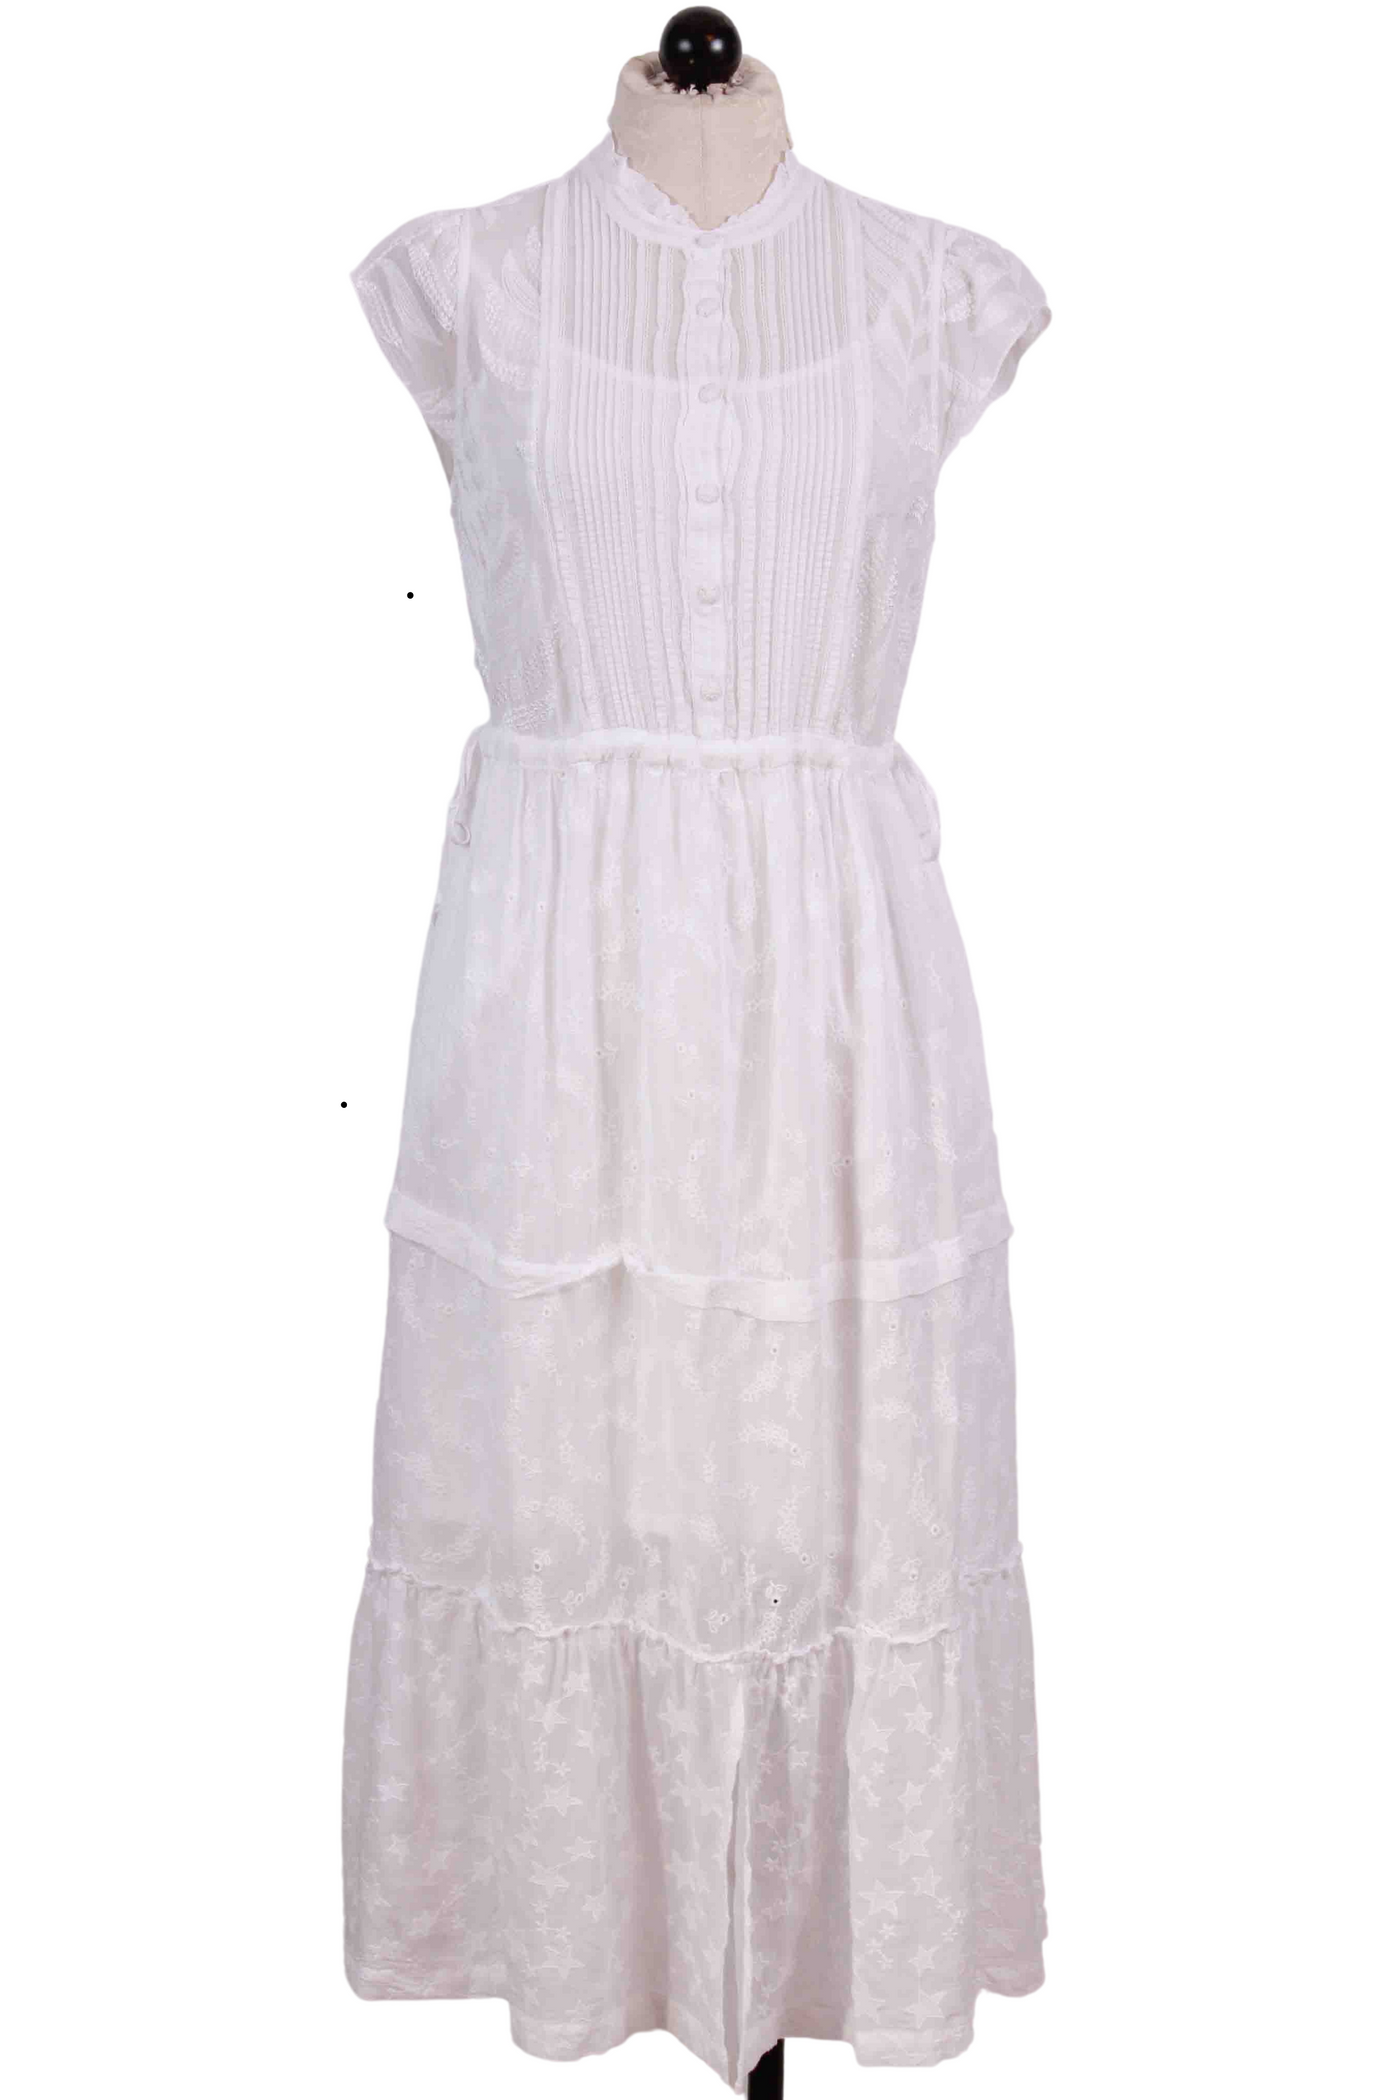 White Embroidered Vitaly Midi Dress with Slip by Johnny Was